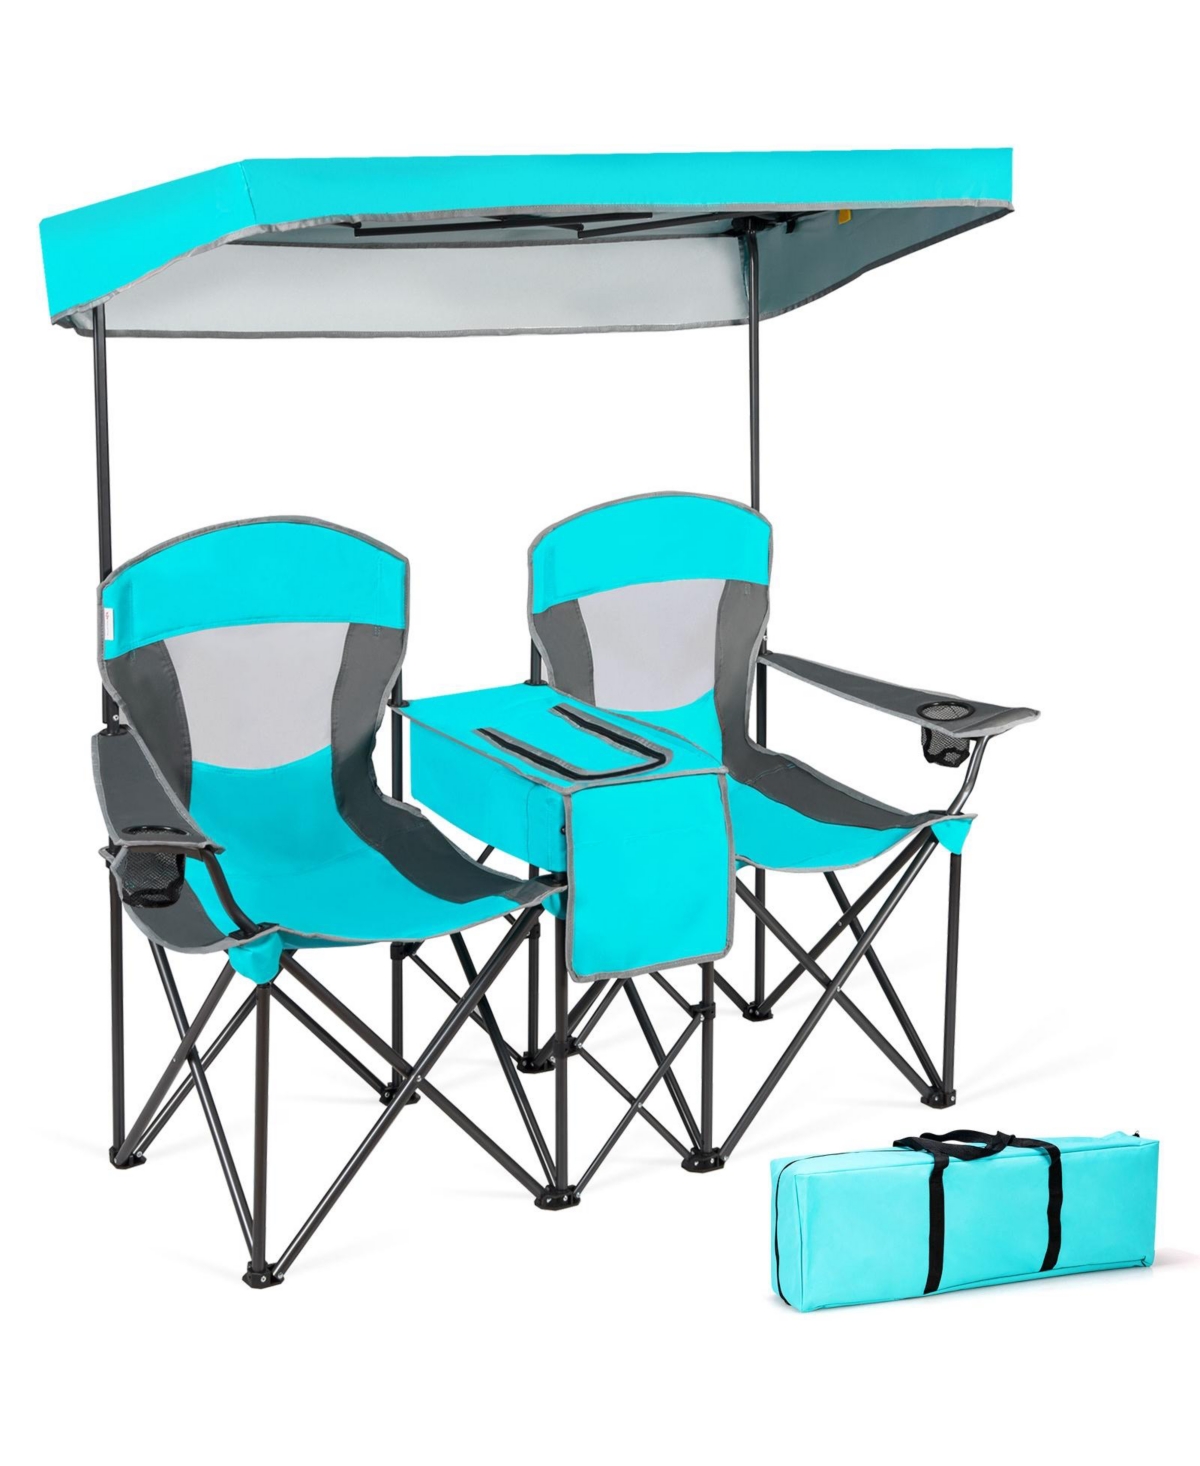 Turquoise Portable Folding Camping Canopy Chairs with Cup Holder - Green